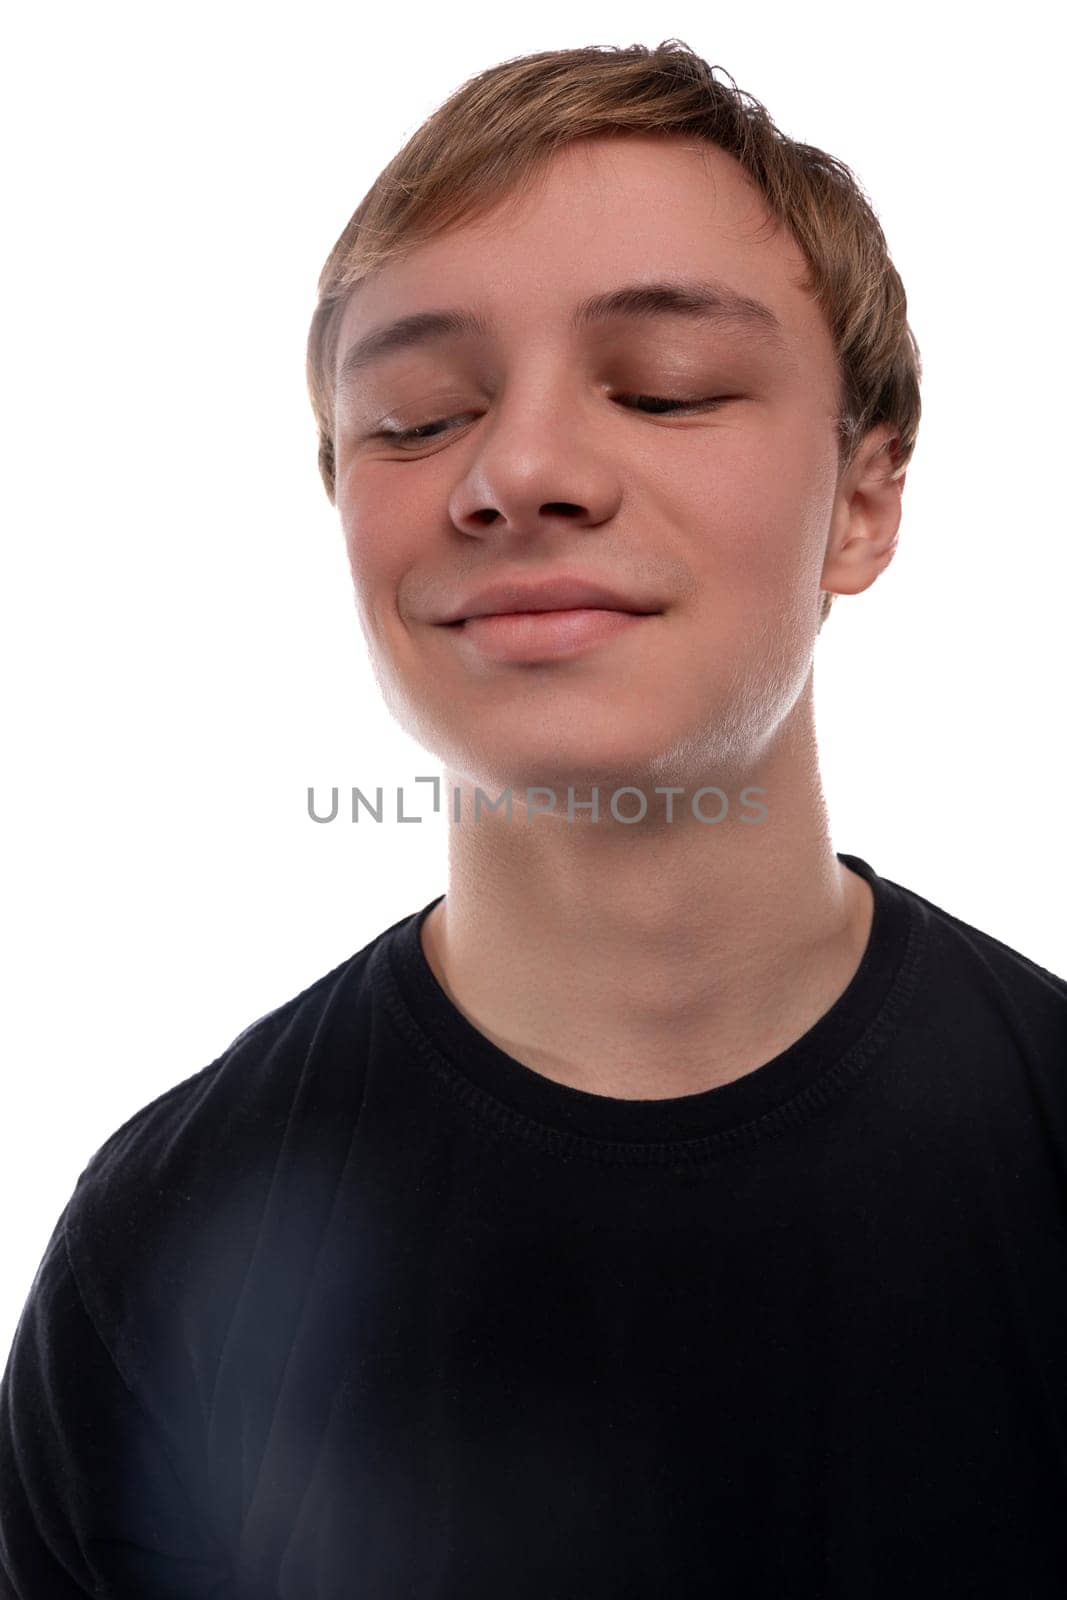 Close-up portrait of a blond 16 year old teenage boy against a background with copy space.